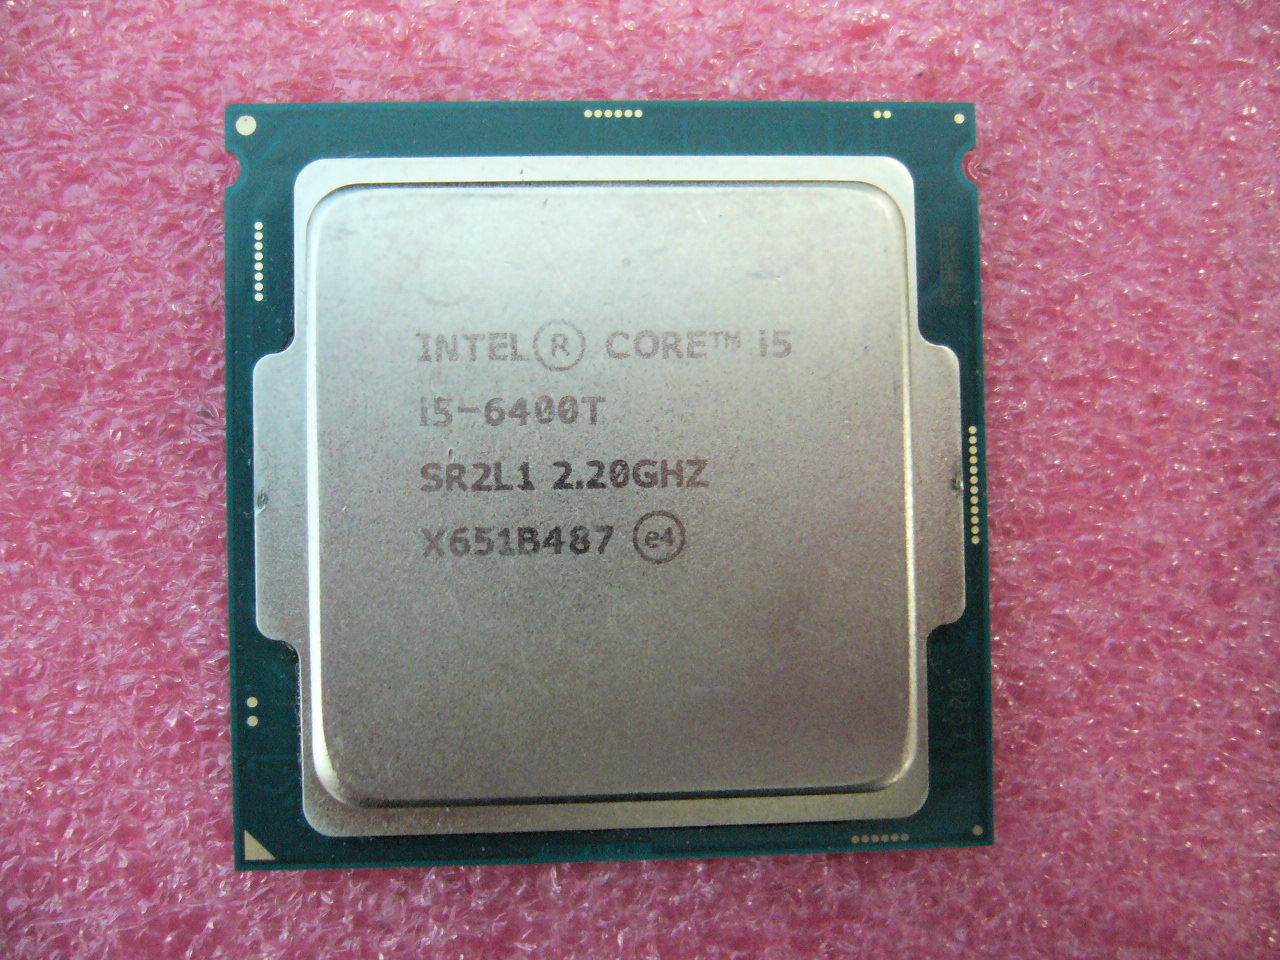 QTY 1x Intel CPU i5-6400T Quad-Cores 2.20Ghz 6MB LGA1151 SR2L1 SR2BS NOT WORKING